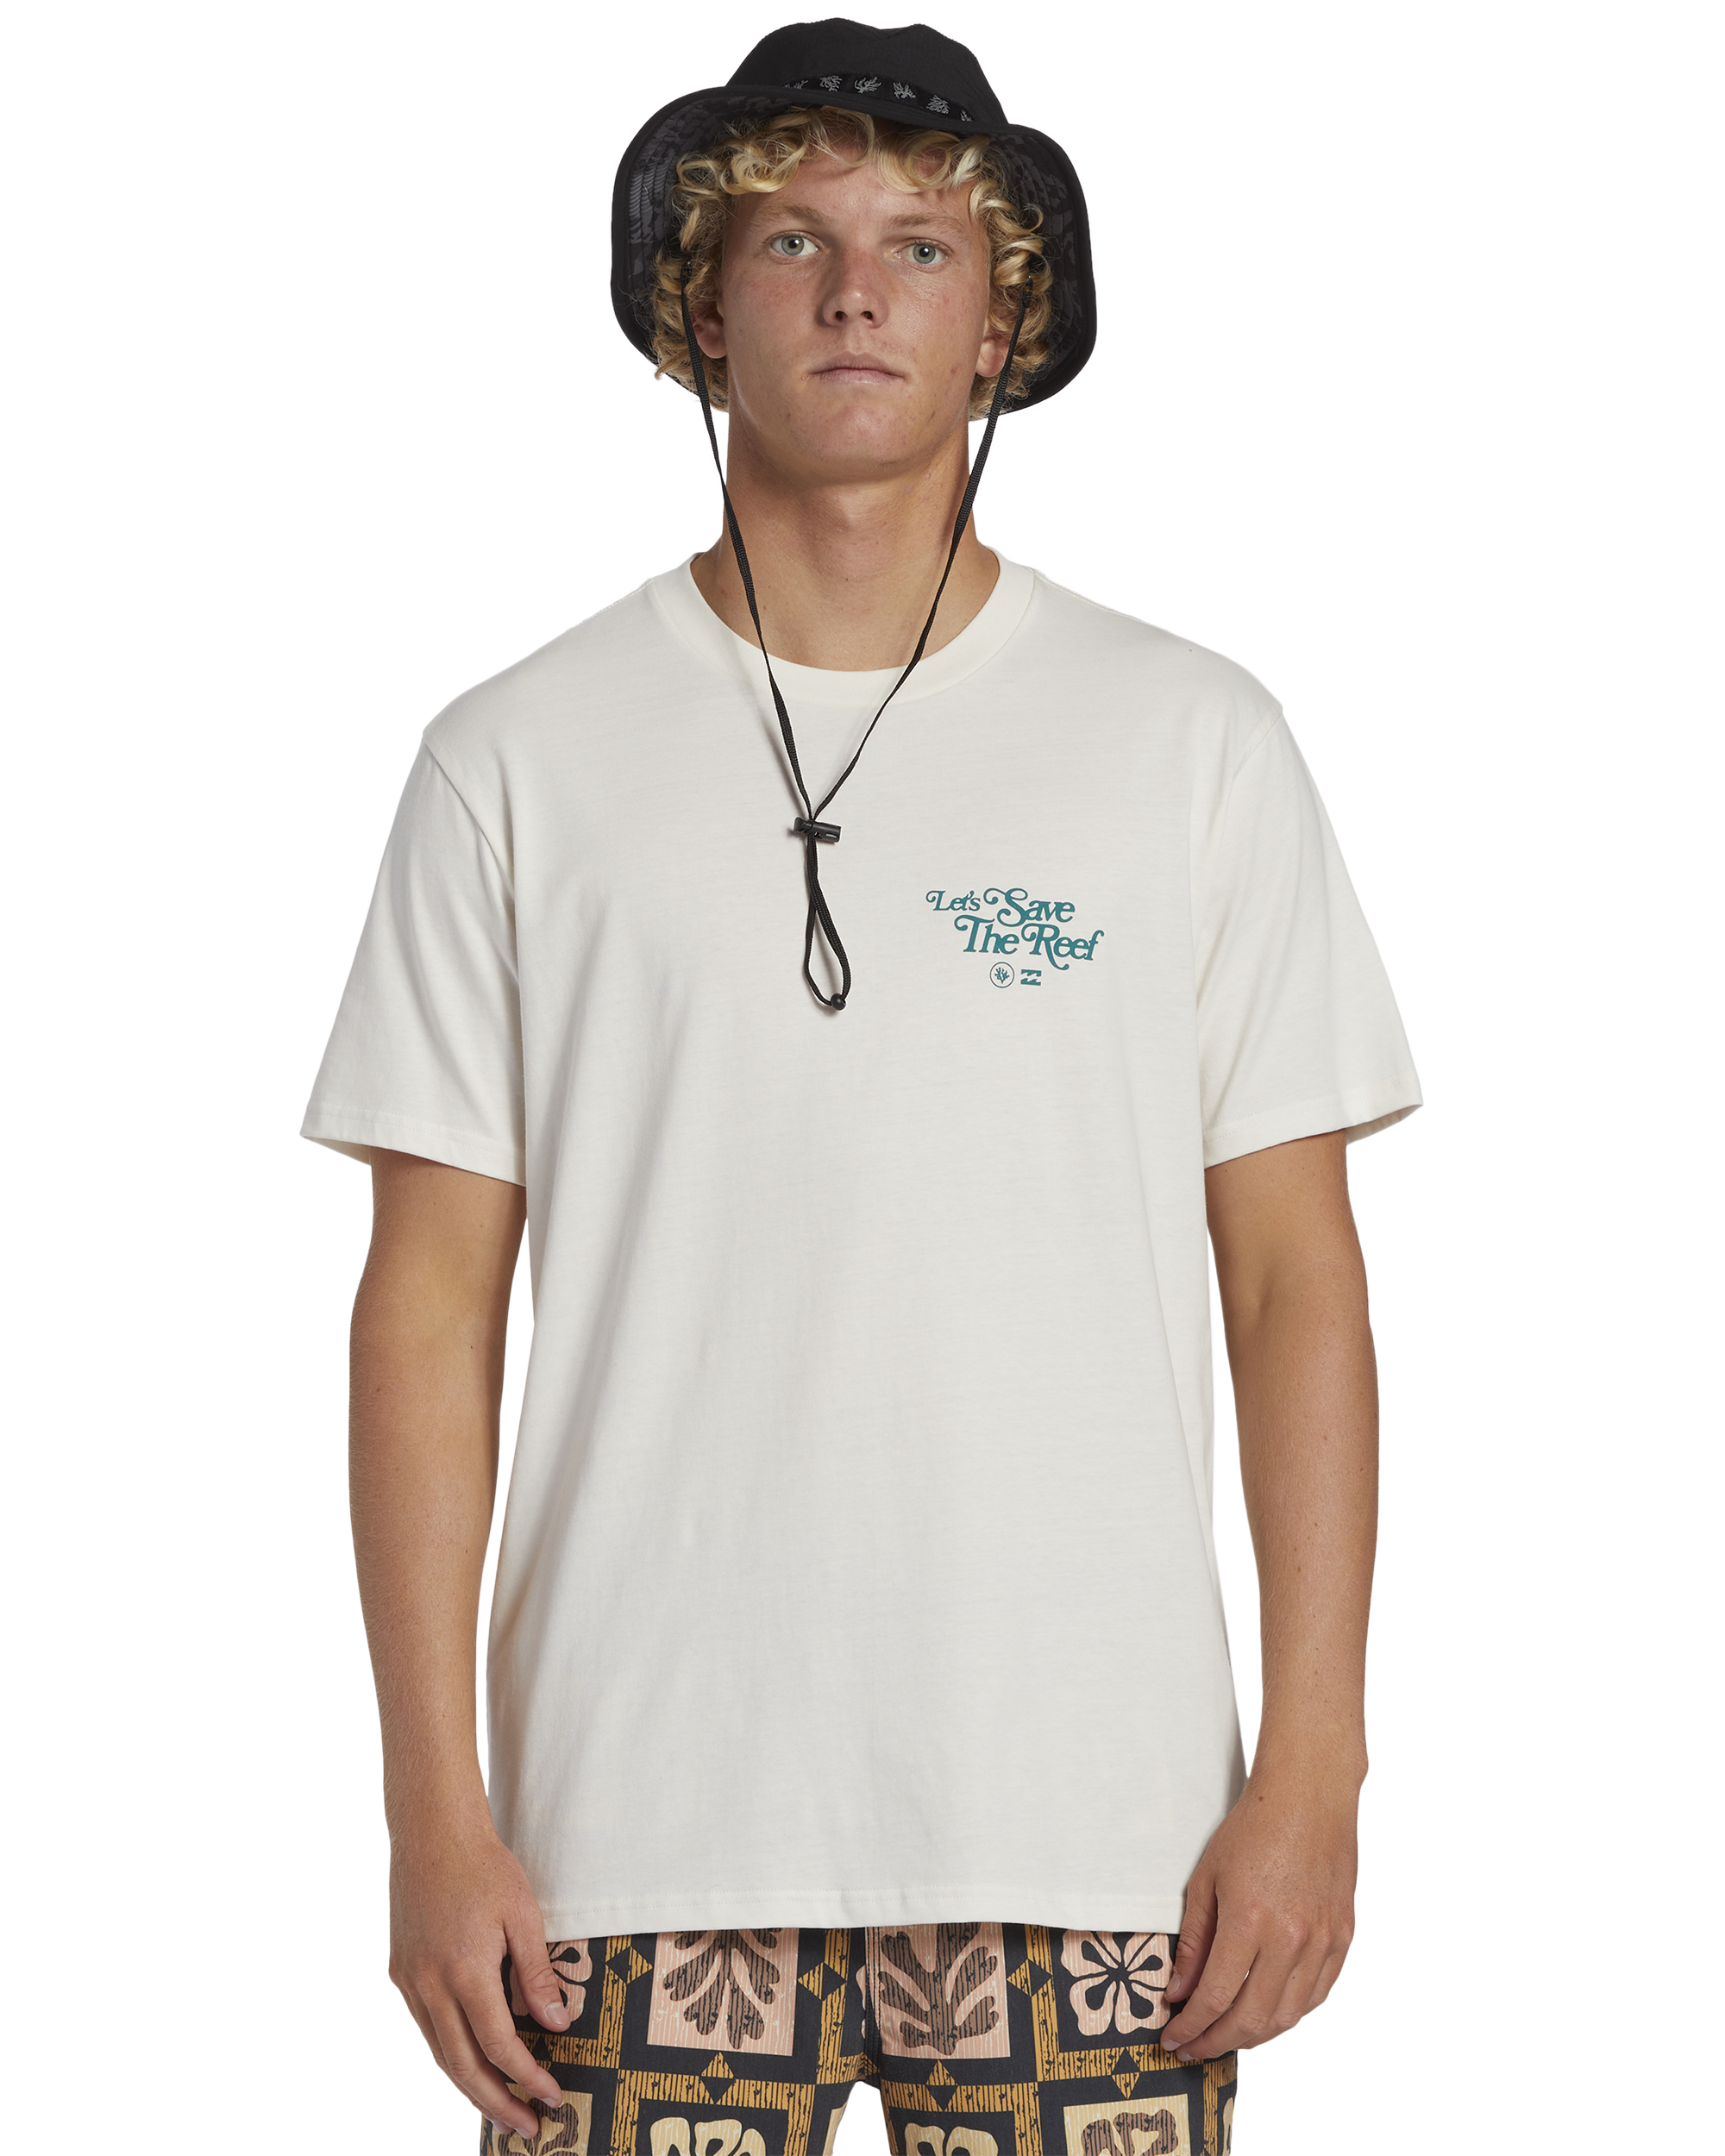 BILLABONG CG LETS SAVE THE REEF SS ABYZT02335-OFW T-SHIRT SHORT SLEEVE (M)